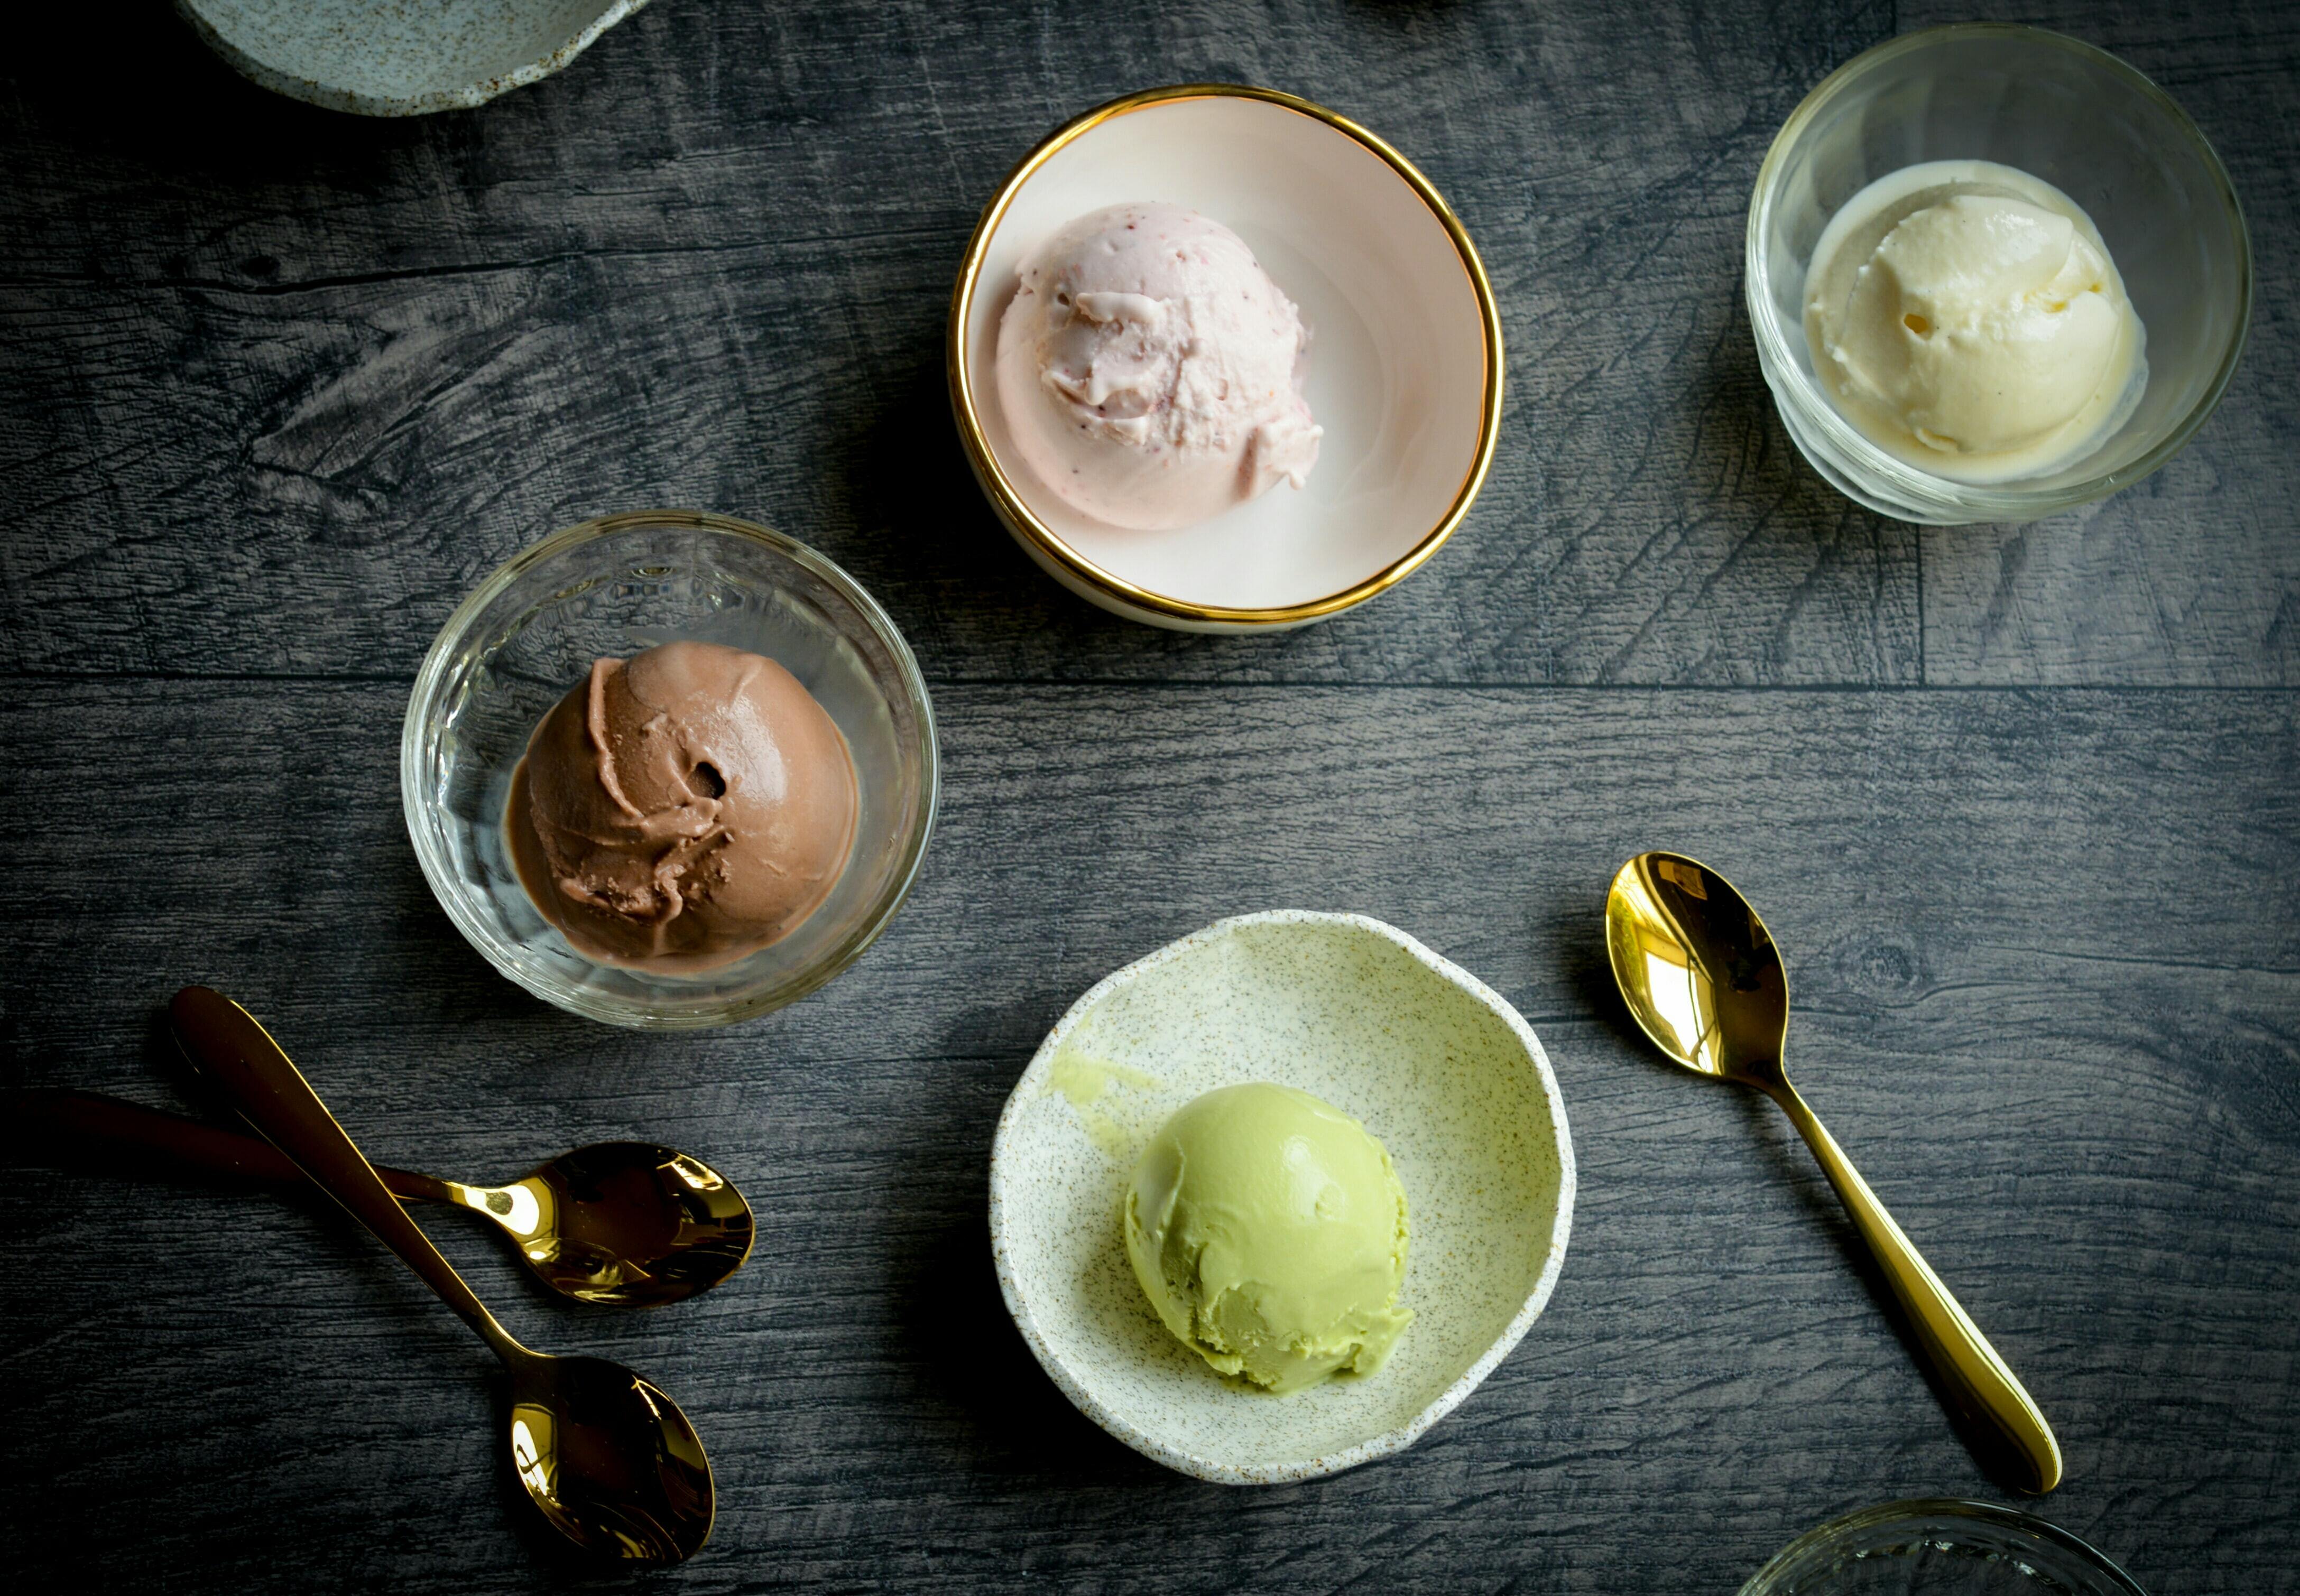 How Fifty could use data to power advertising for low-calorie ice cream brand Halo Top.